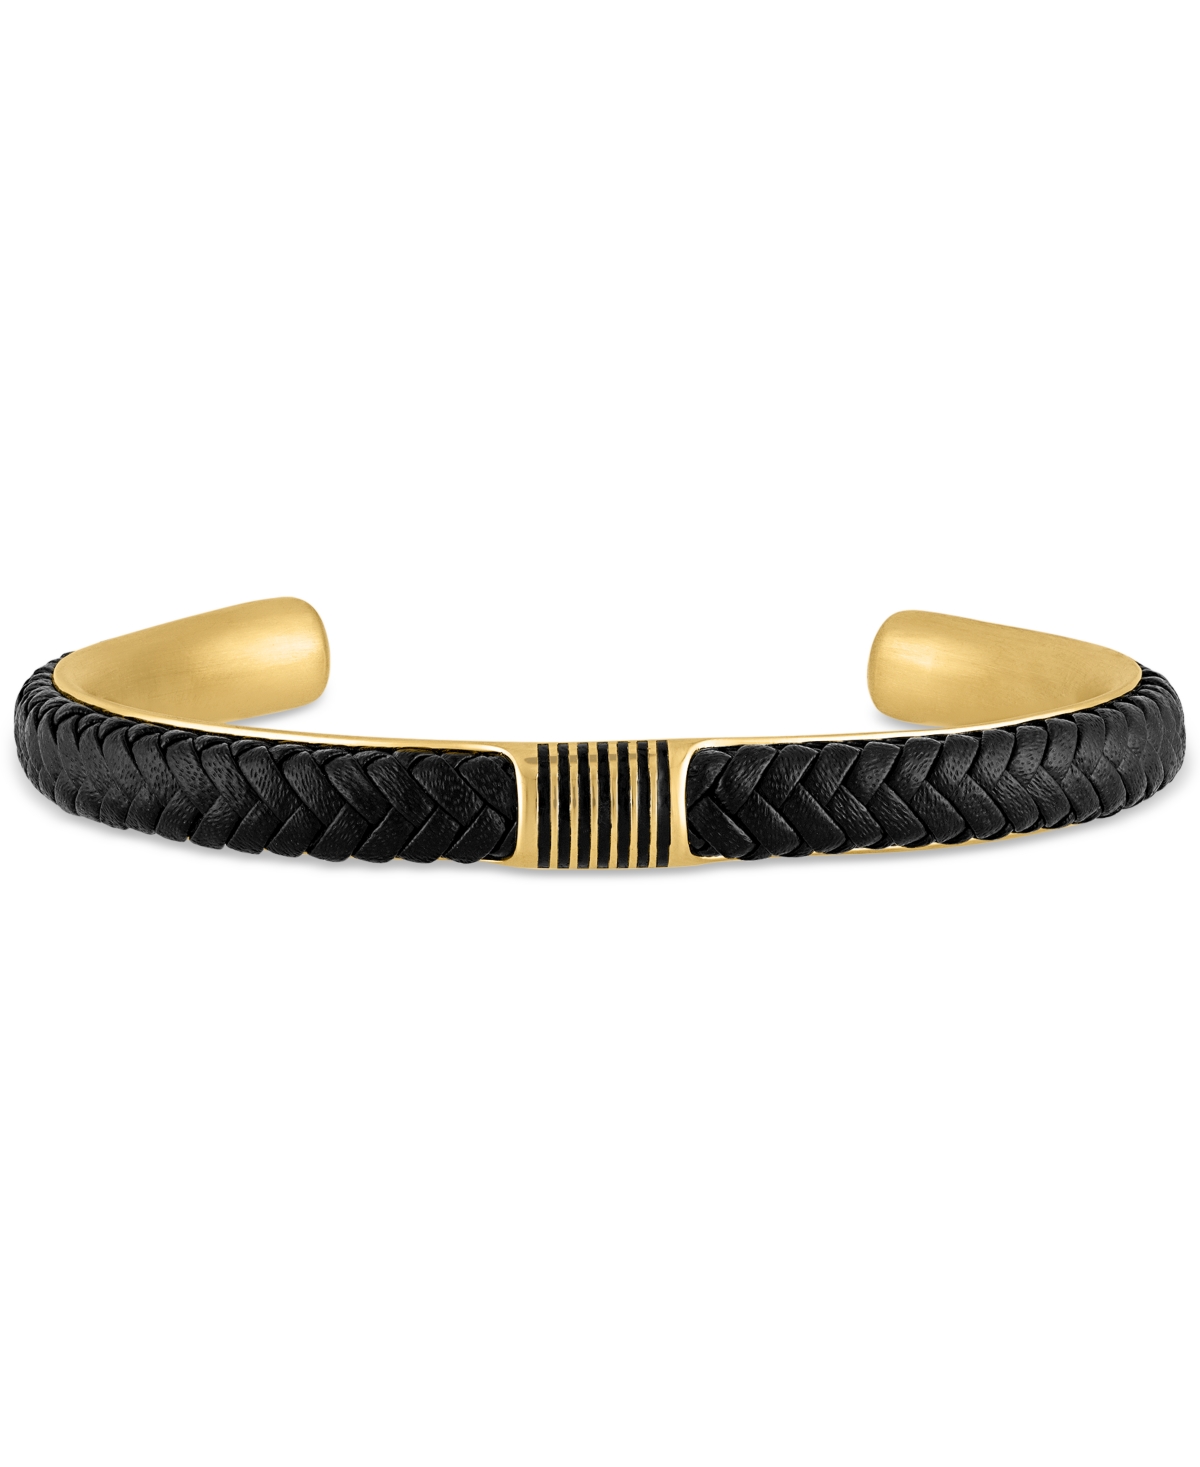 Woven Leather Cuff Bracelet in Gold-Tone Ion-Plated Stainless Steel, Created for Macy's - Black